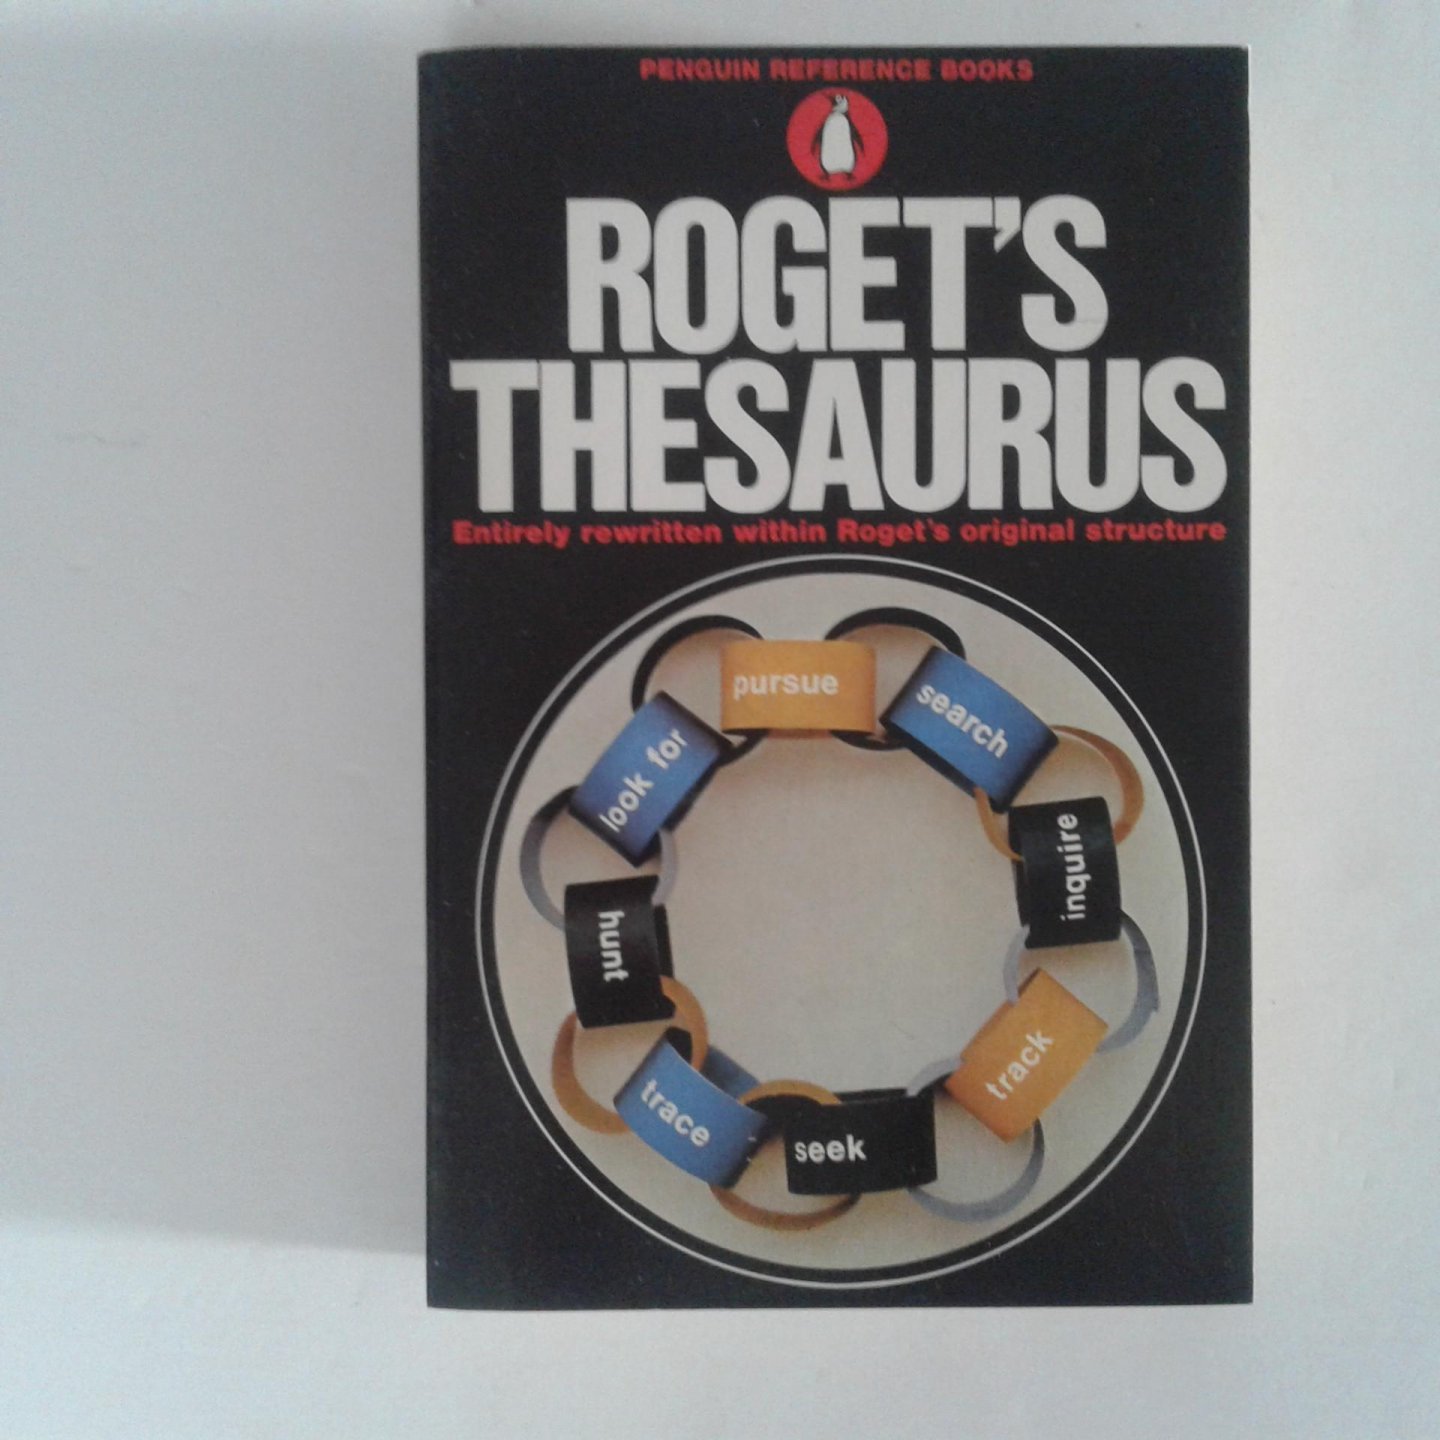 Dutch, Rober A. - Roget's Thesaurus of English words and Phrases